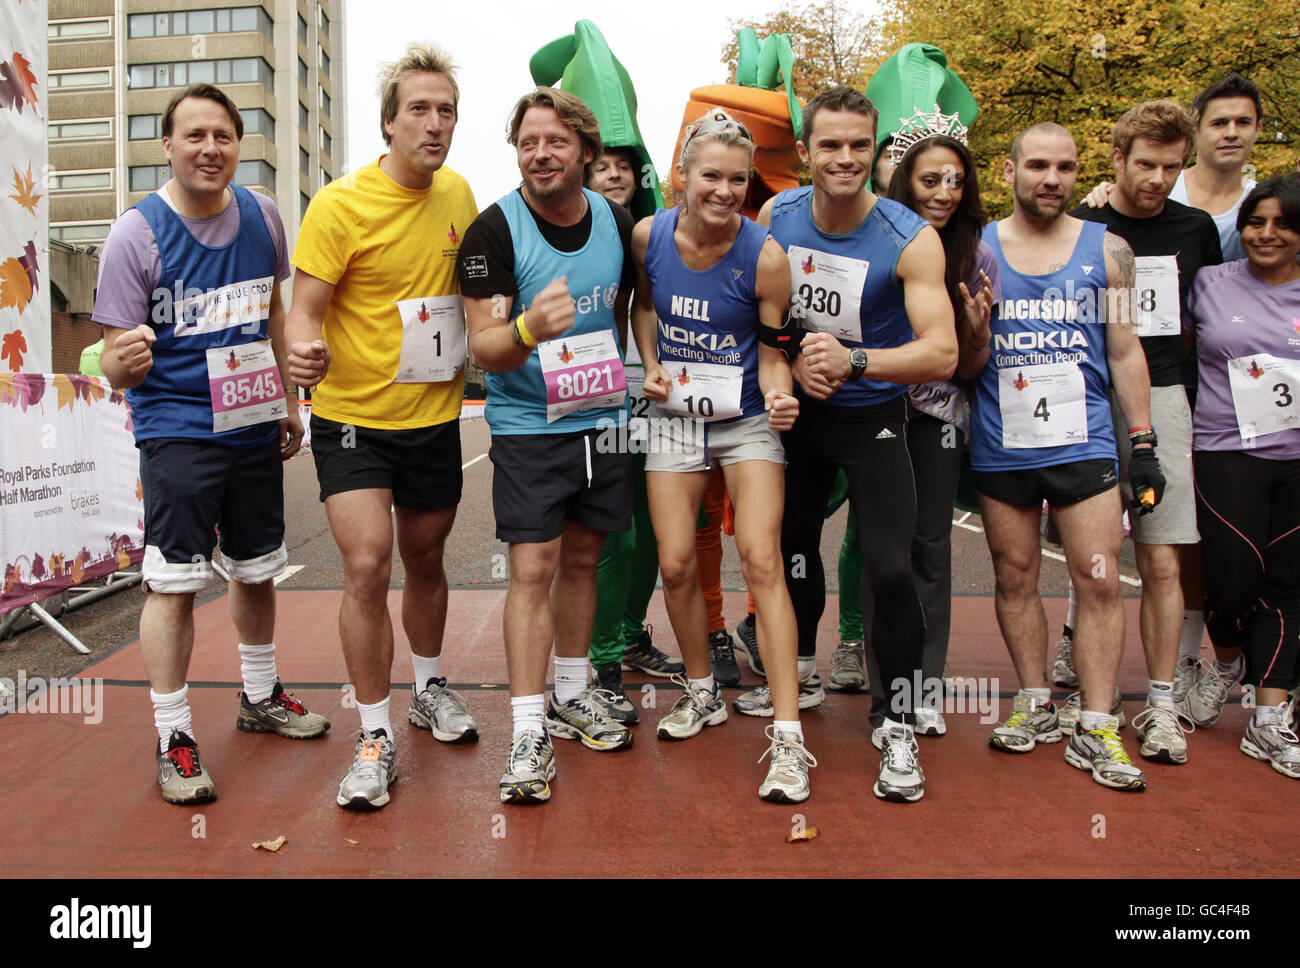 Celebrity participants, including (left to right) Gary Webster, Ben Fogle, Charley Boorman, Nell McAndrew, personal trainer Matt Roberts, Rachel Christie, ultra marathon runner Jackson Williams, Tom Aiken, Jeremy Edwards and Rani Price, taking part in the Royal Parks Foundation Half Marathon, which starts and ends in Hyde Park in central London. Stock Photo